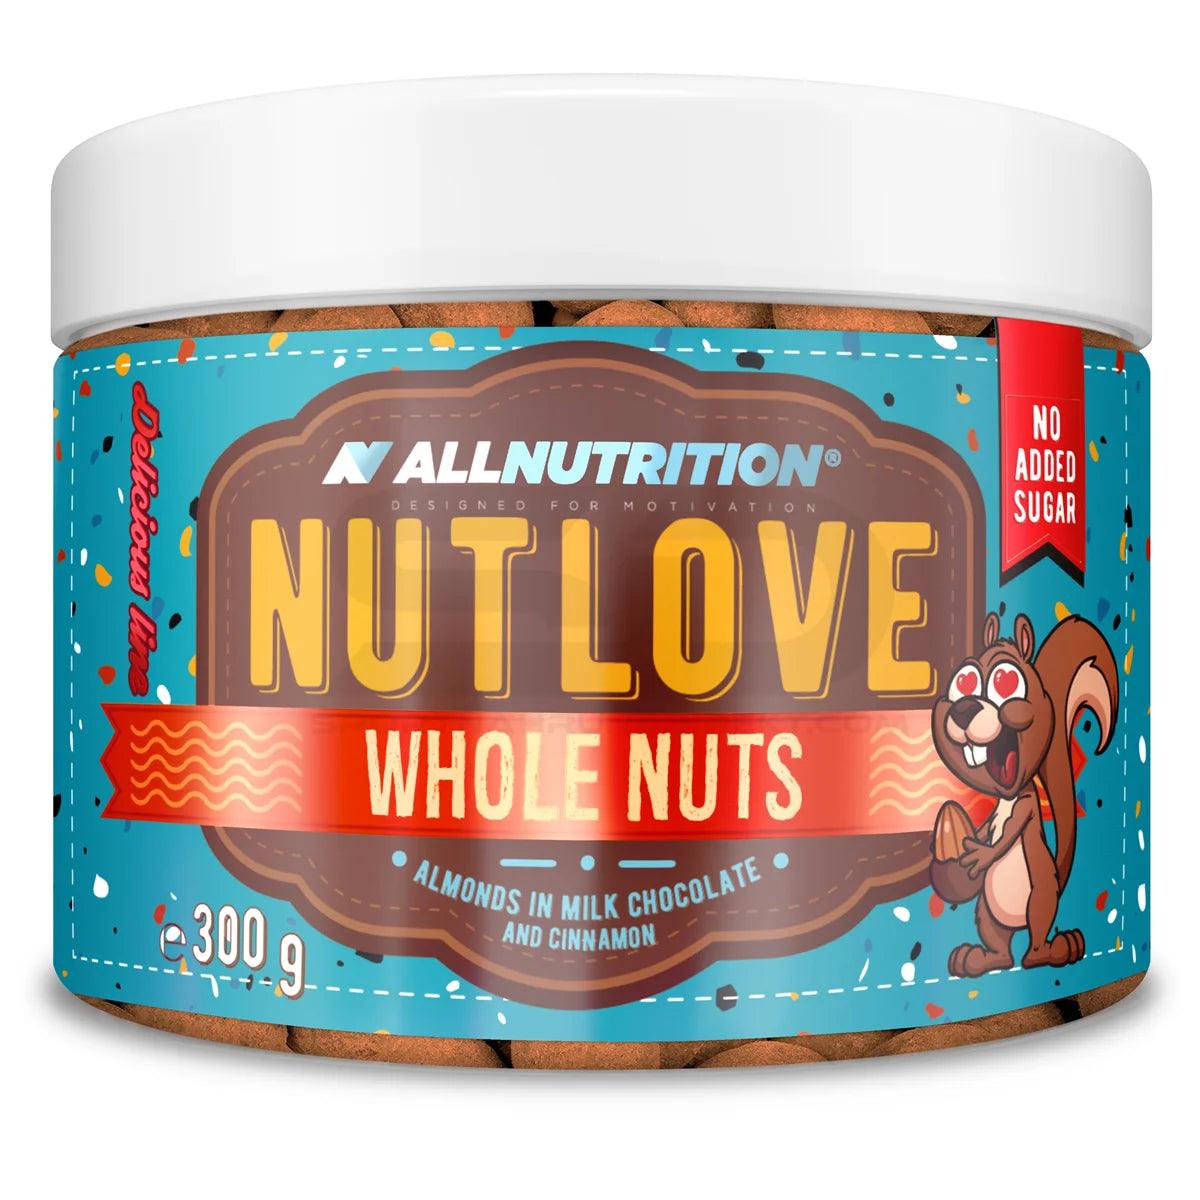 ALL NUTRITION® WHOLE NUTS 300g ALMONDS - Supplement Support